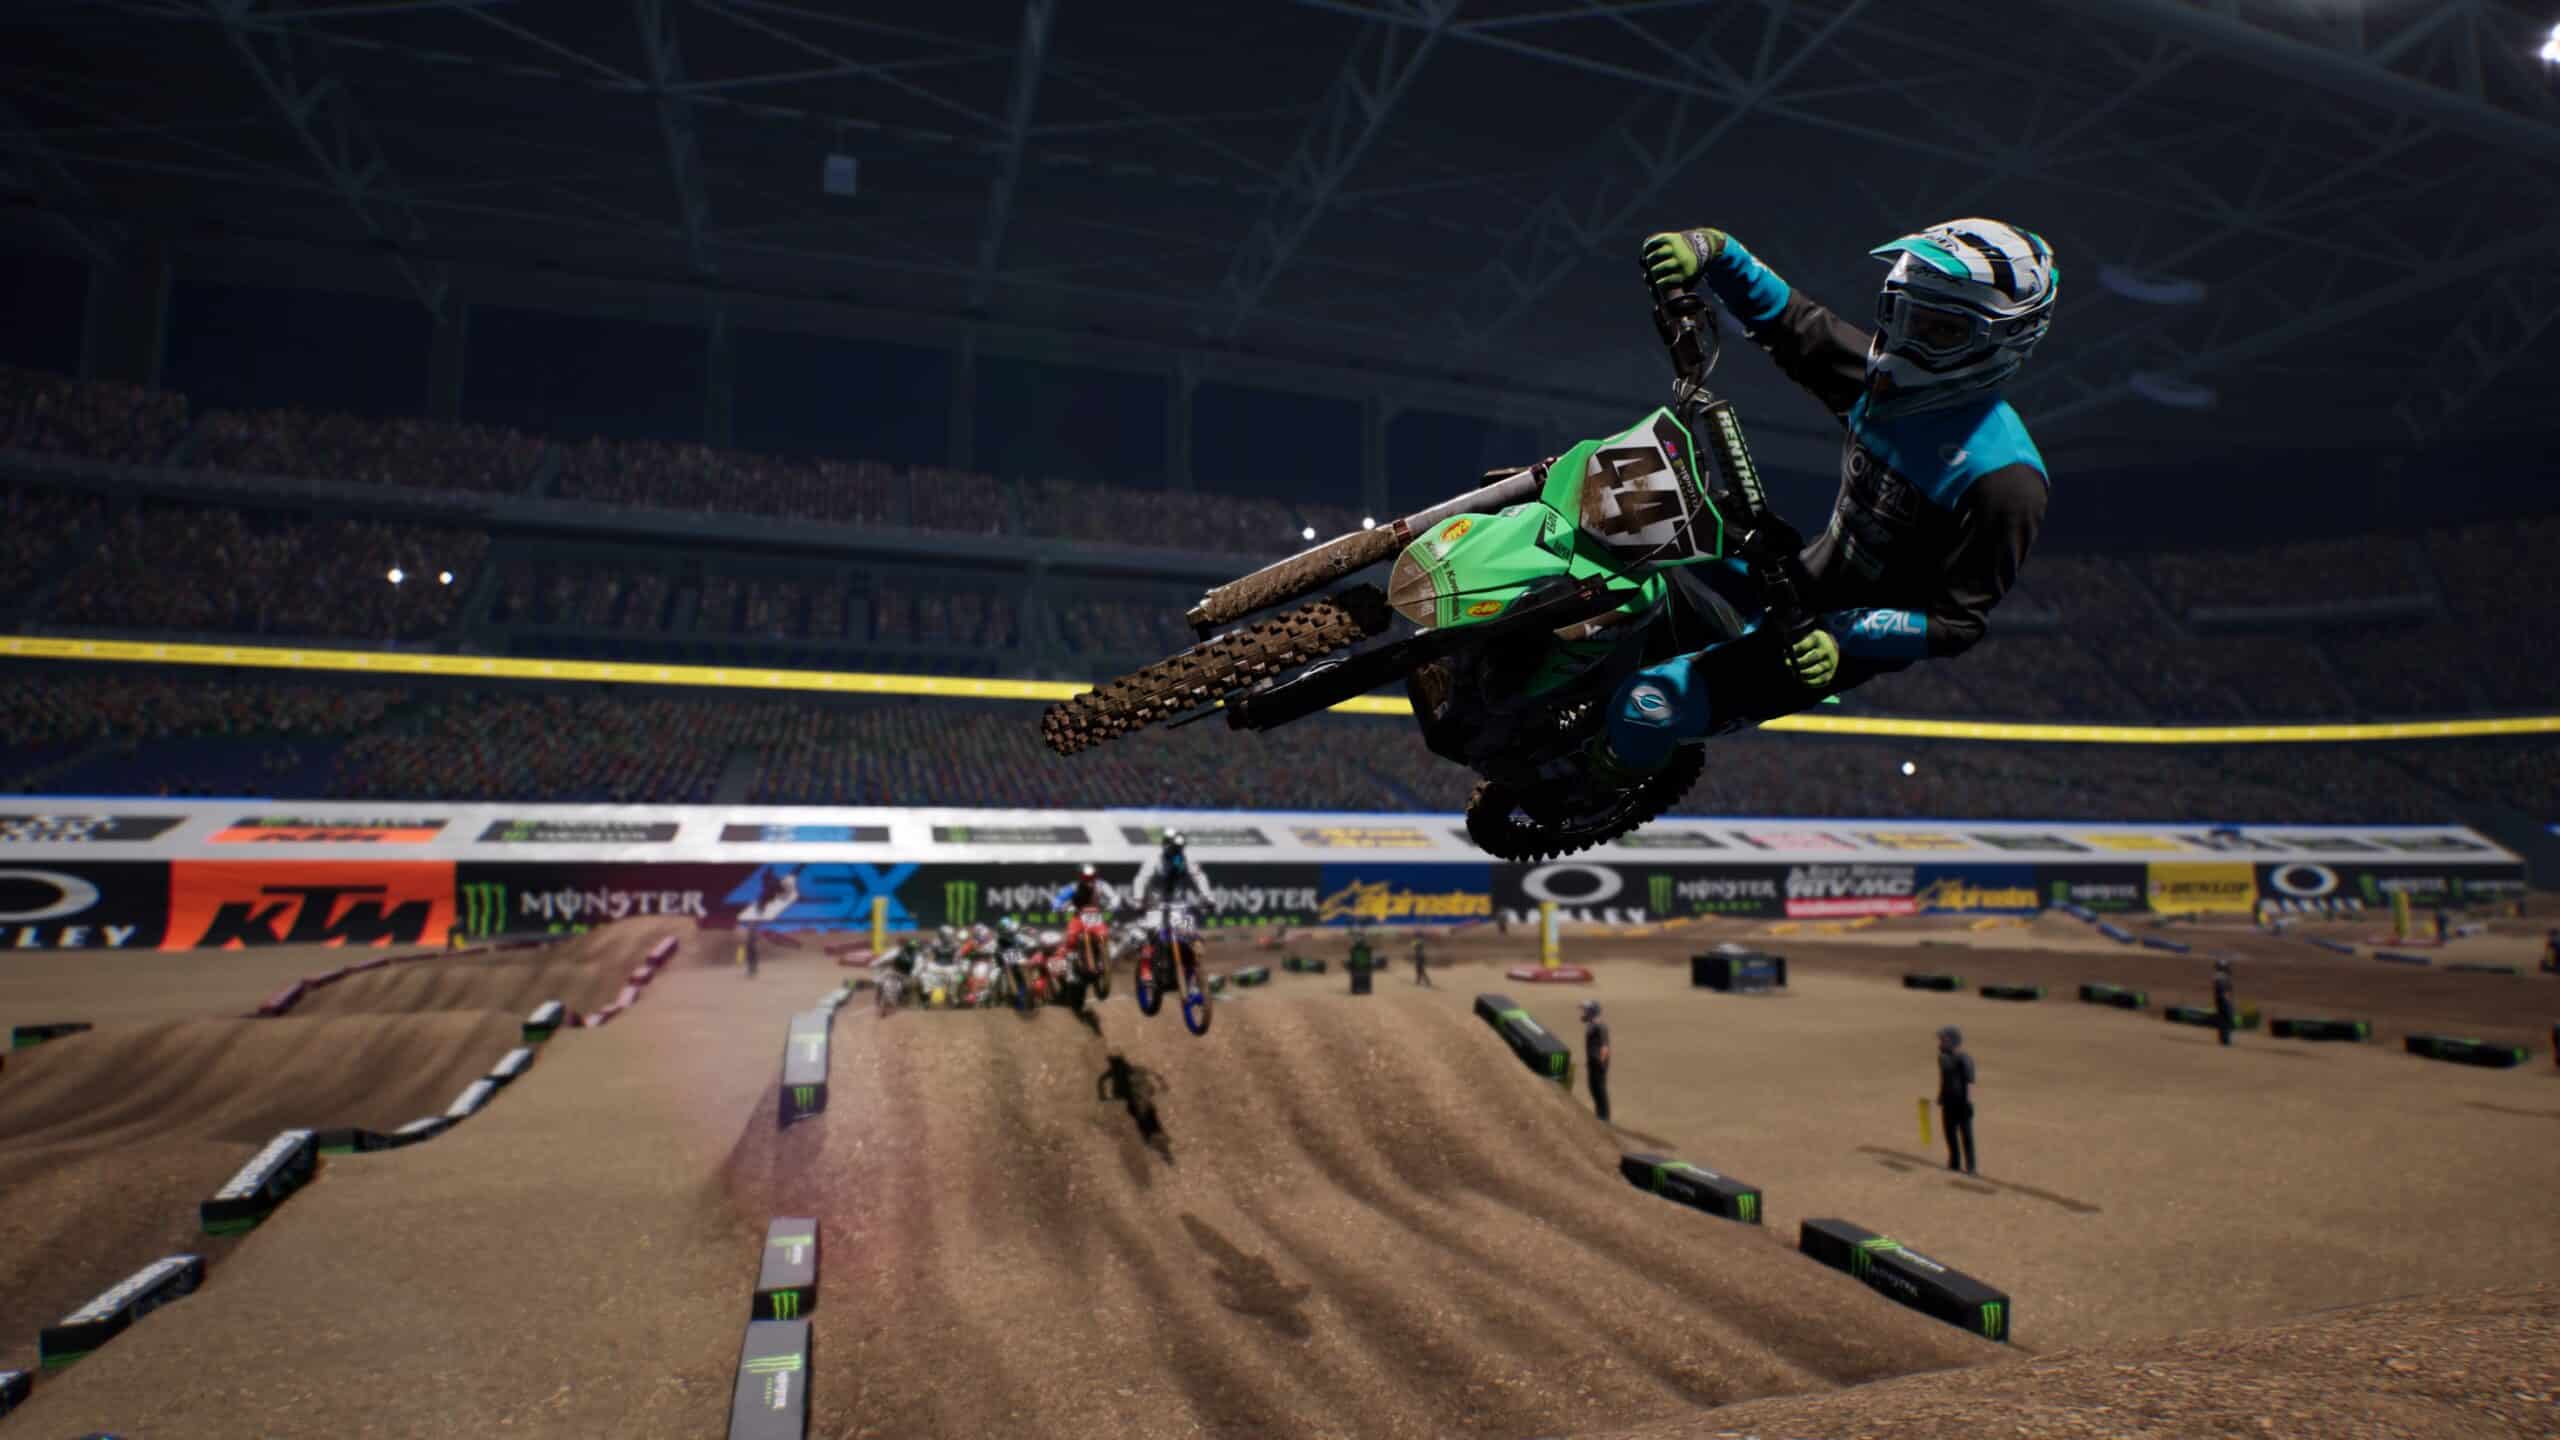 Create a new track within Supercross 5 and it could be built in real